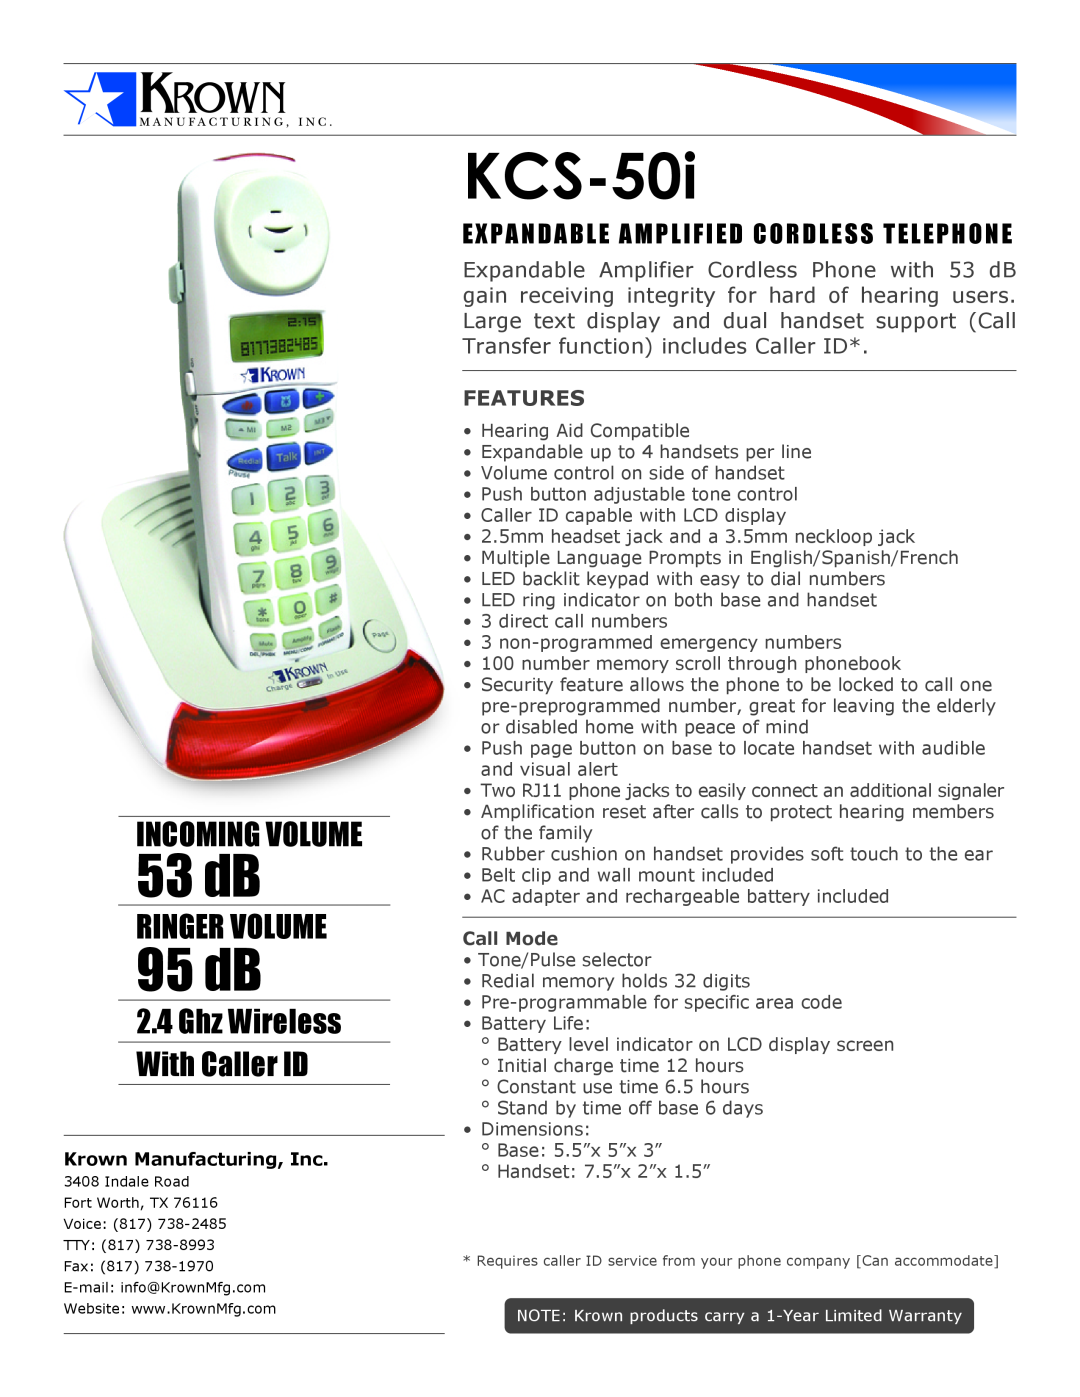 Krown Manufacturing KCS-50i warranty 53 dB, 95 dB, Incoming Volume, Ringer Volume, Ghz Wireless With Caller ID, Features 